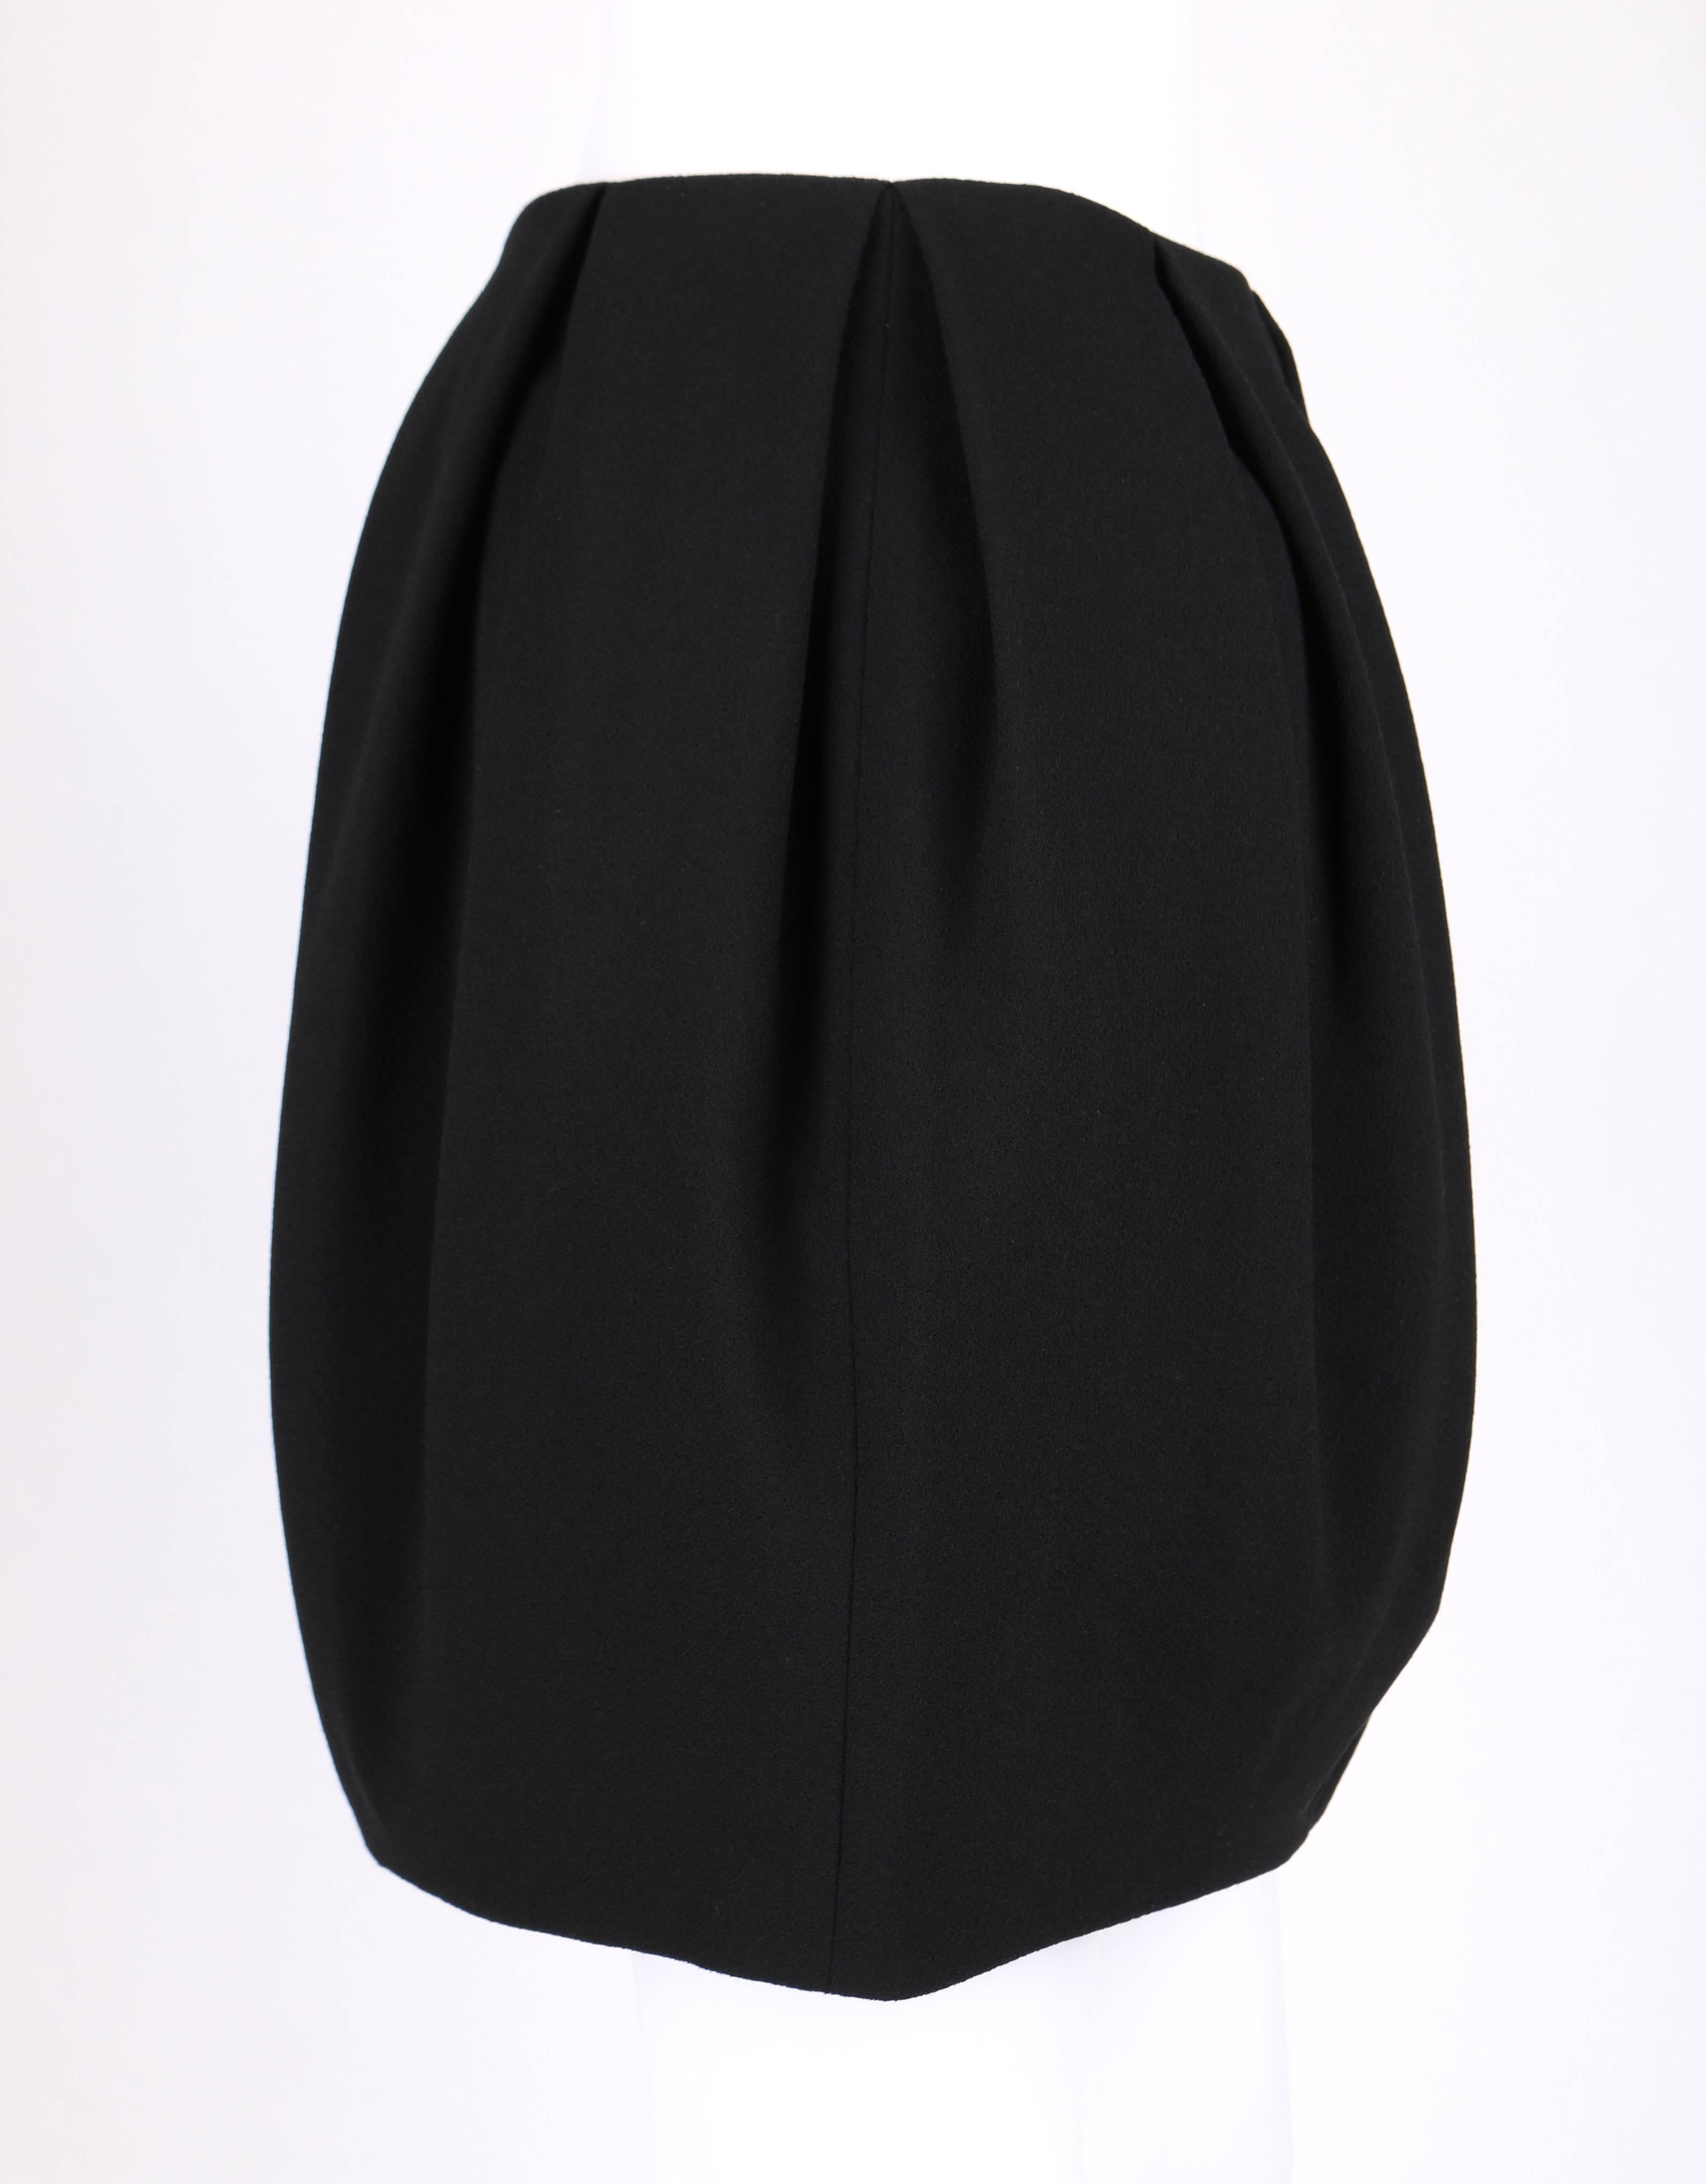 Alexander McQueen Autumn/Winter 2012 black wool crepe mini skirt. Box pleated waistline. Side invisible zipper with hook and eye closure at top. Fully lined. Marked Fabric Content: 